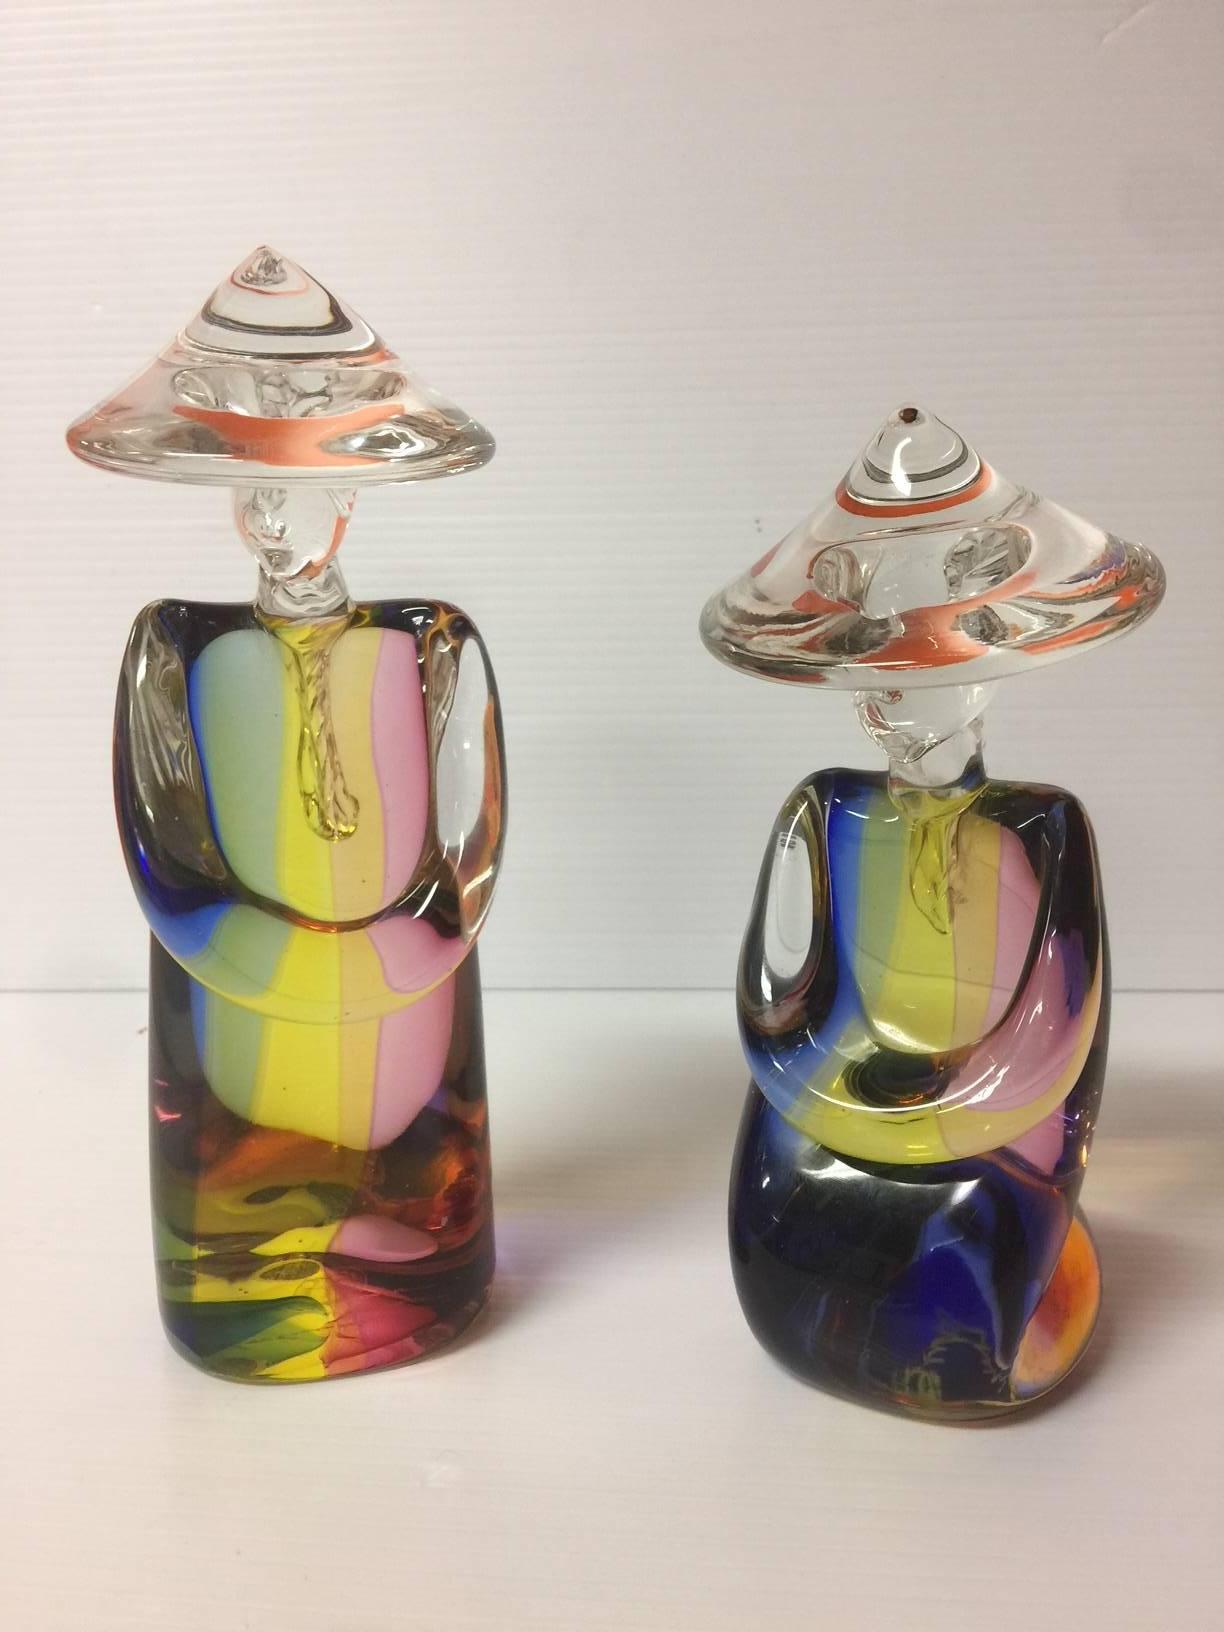 Gorgeous pair of Sommerso art glass Chinese figures in multi-colors by famed glass artist, Archimede Seguso for Murano glass. Each piece is signed by the artist; incredibly vibrant color and great texture!